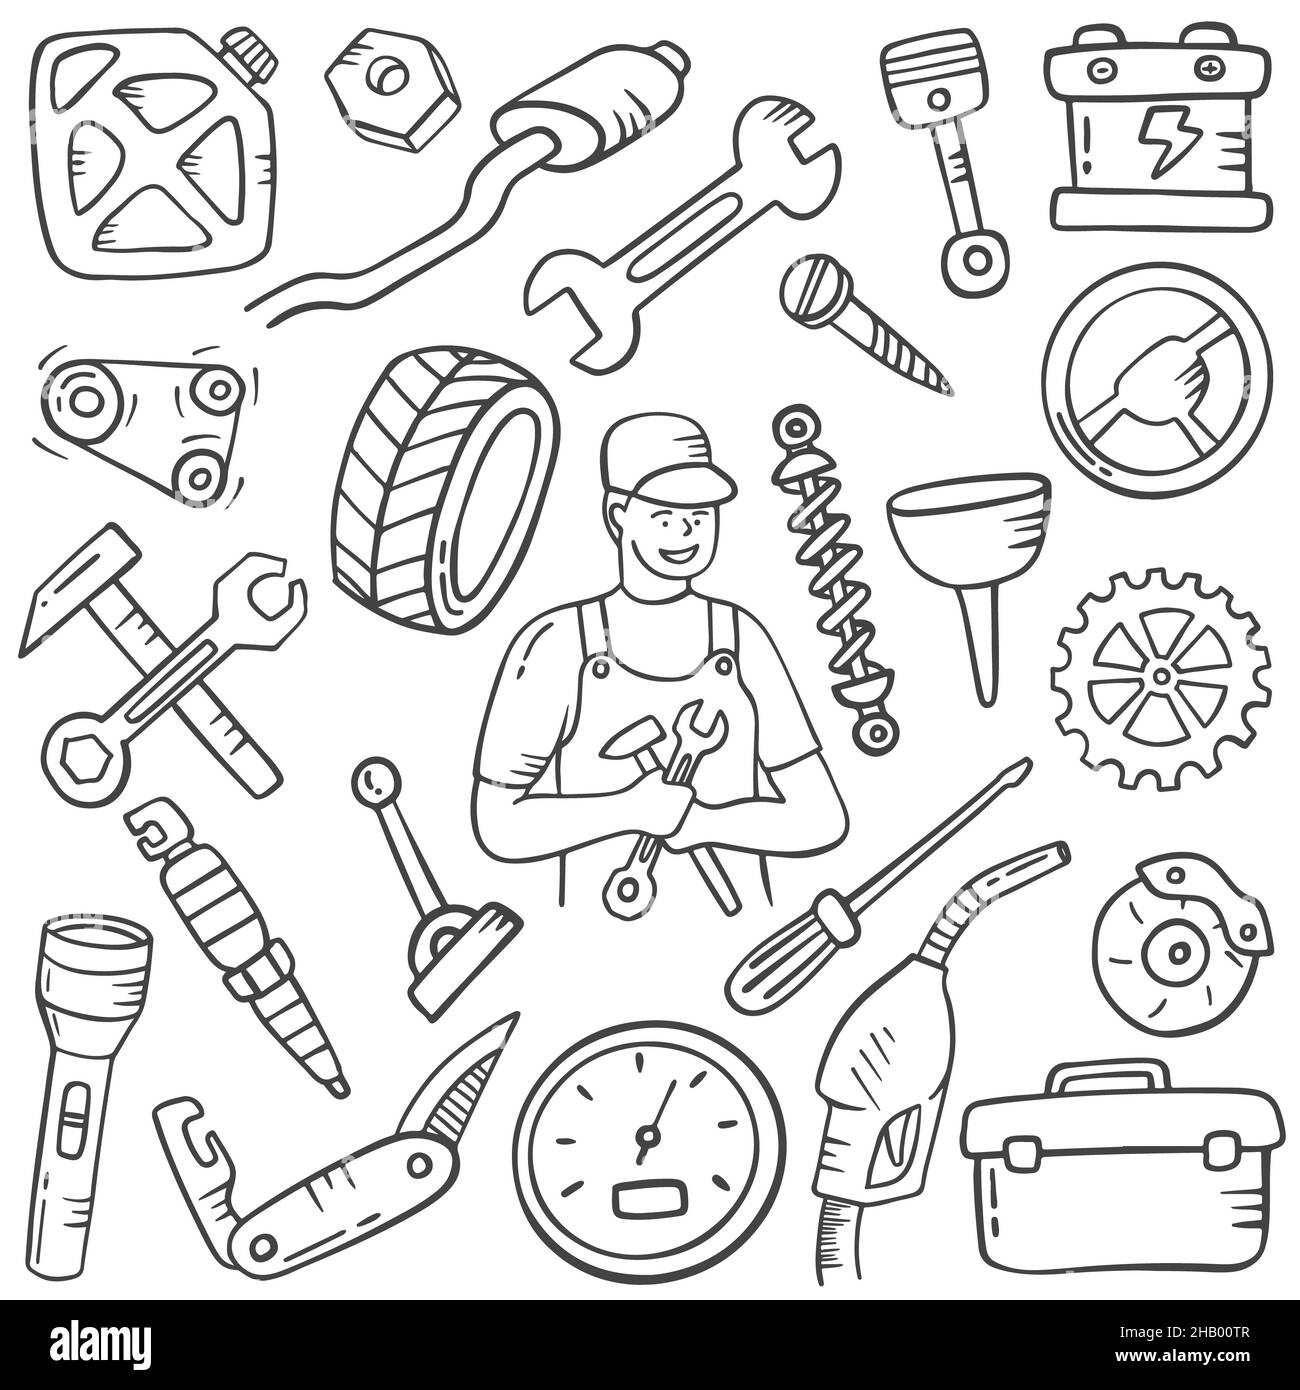 mechanic doodle hand drawn set collections with outline black and white style vector illustration Stock Photo